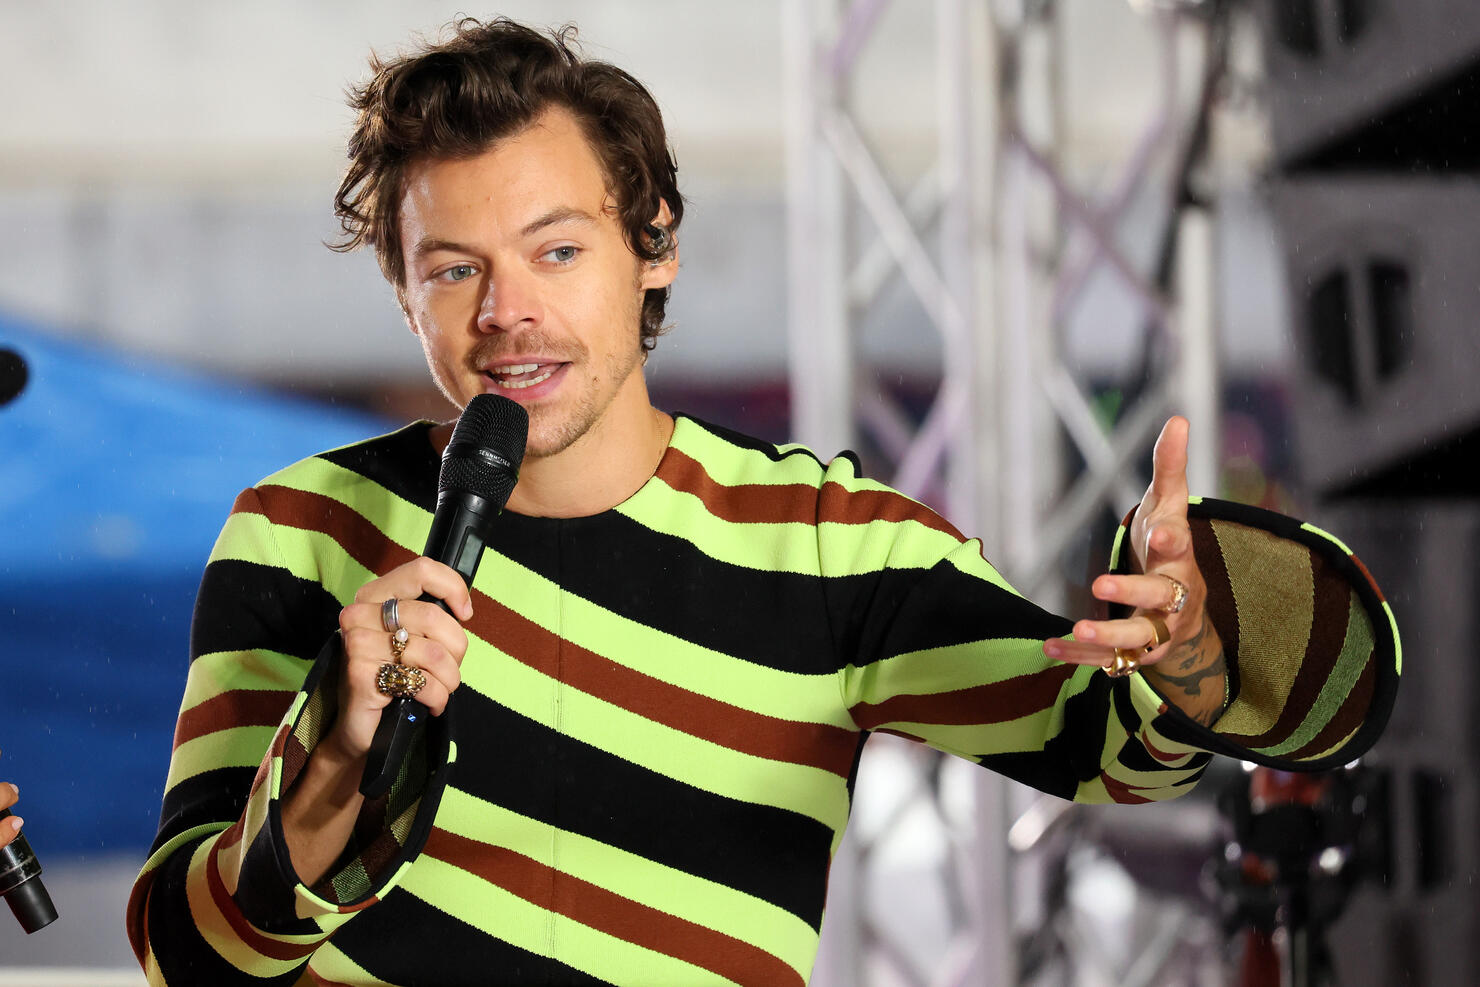 Harry Styles Performs On NBC's "Today"